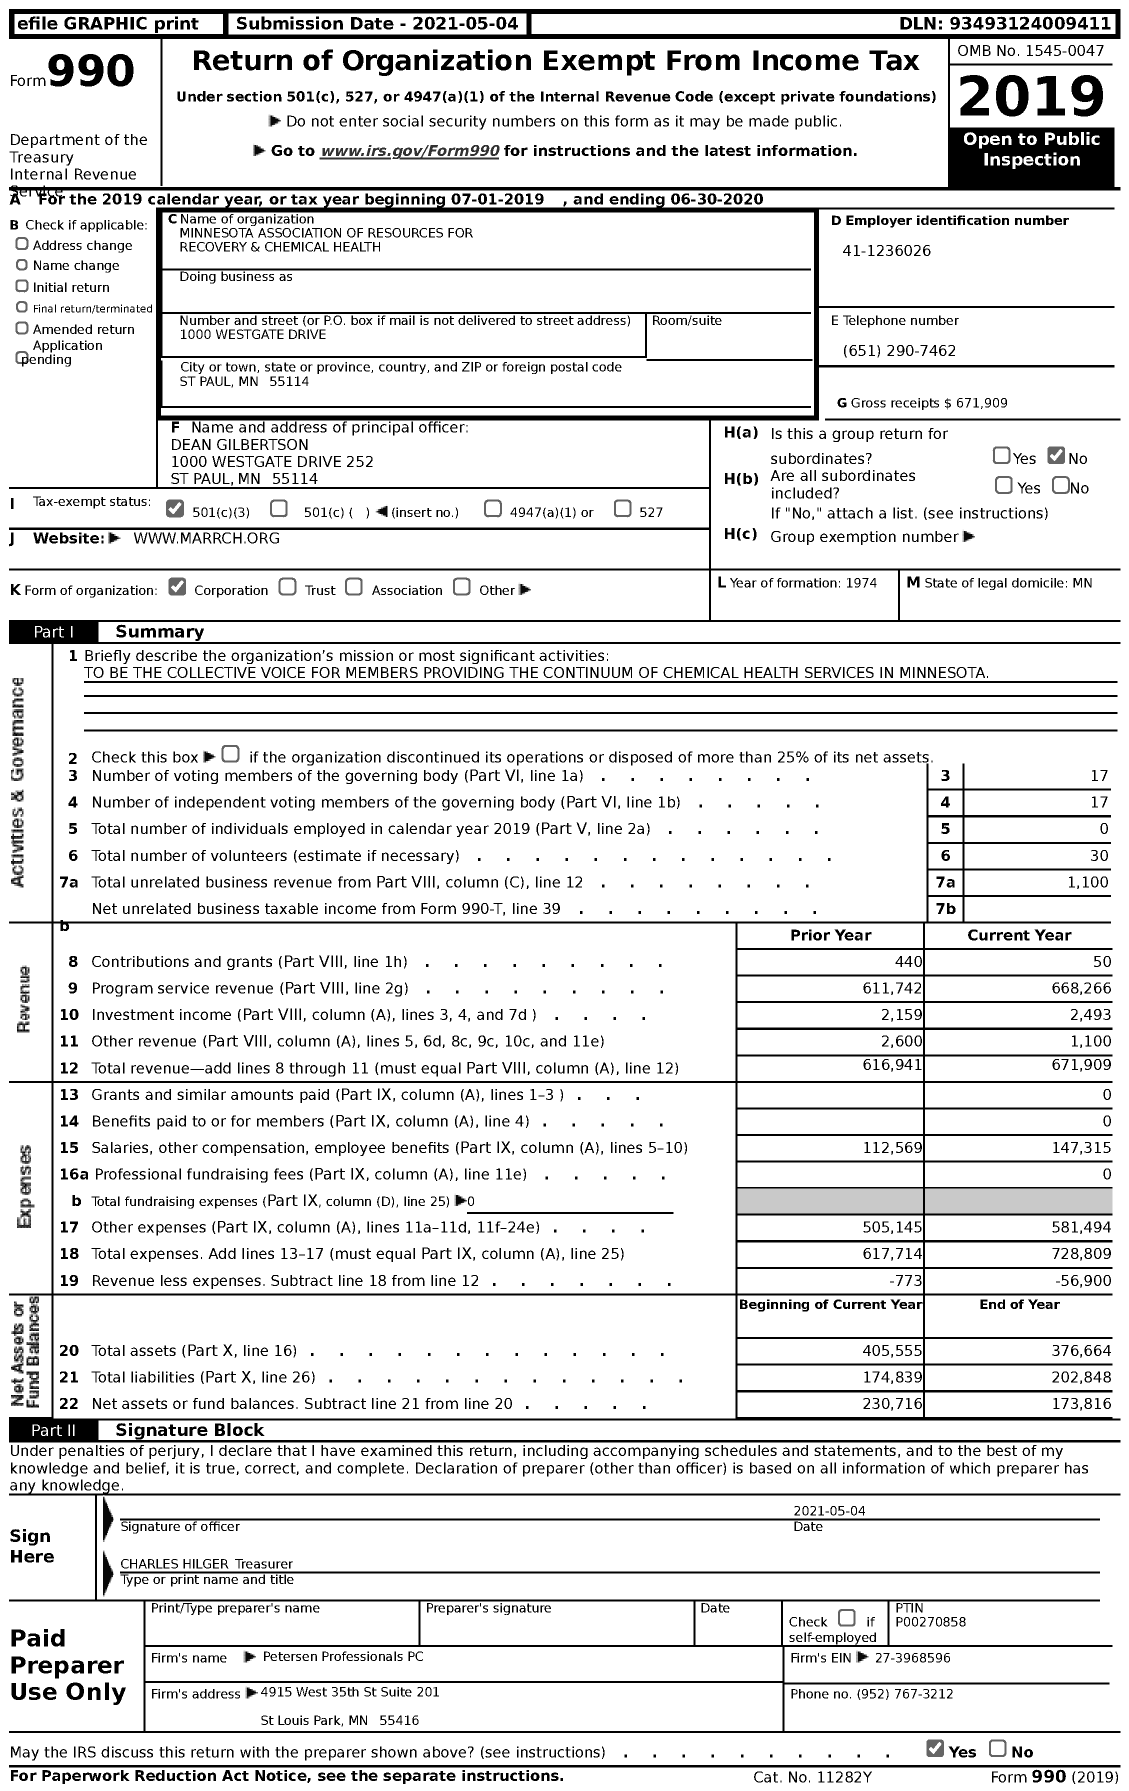 Image of first page of 2019 Form 990 for Minnesota Association of Resources for Recovery and Chemical Health